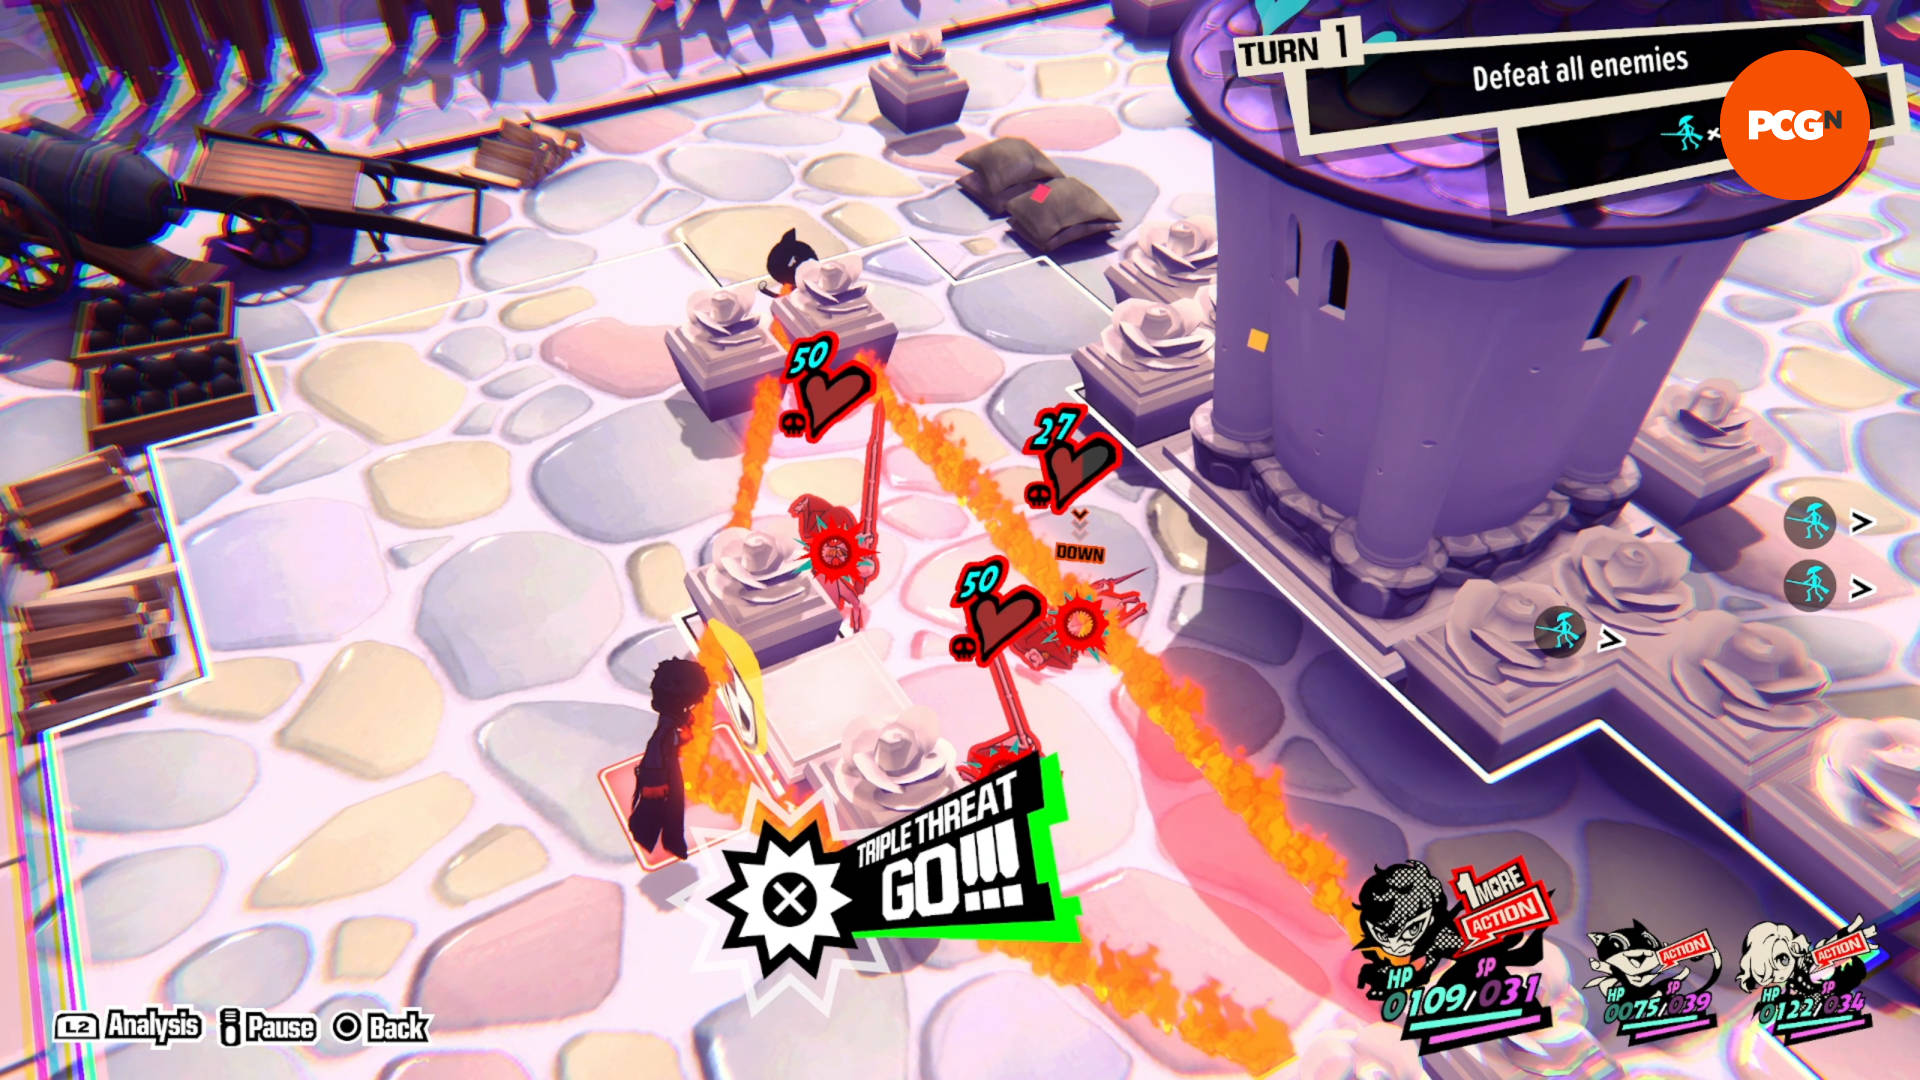 Persona 5 mastered the RPG genre, now Tactica takes on strategy games